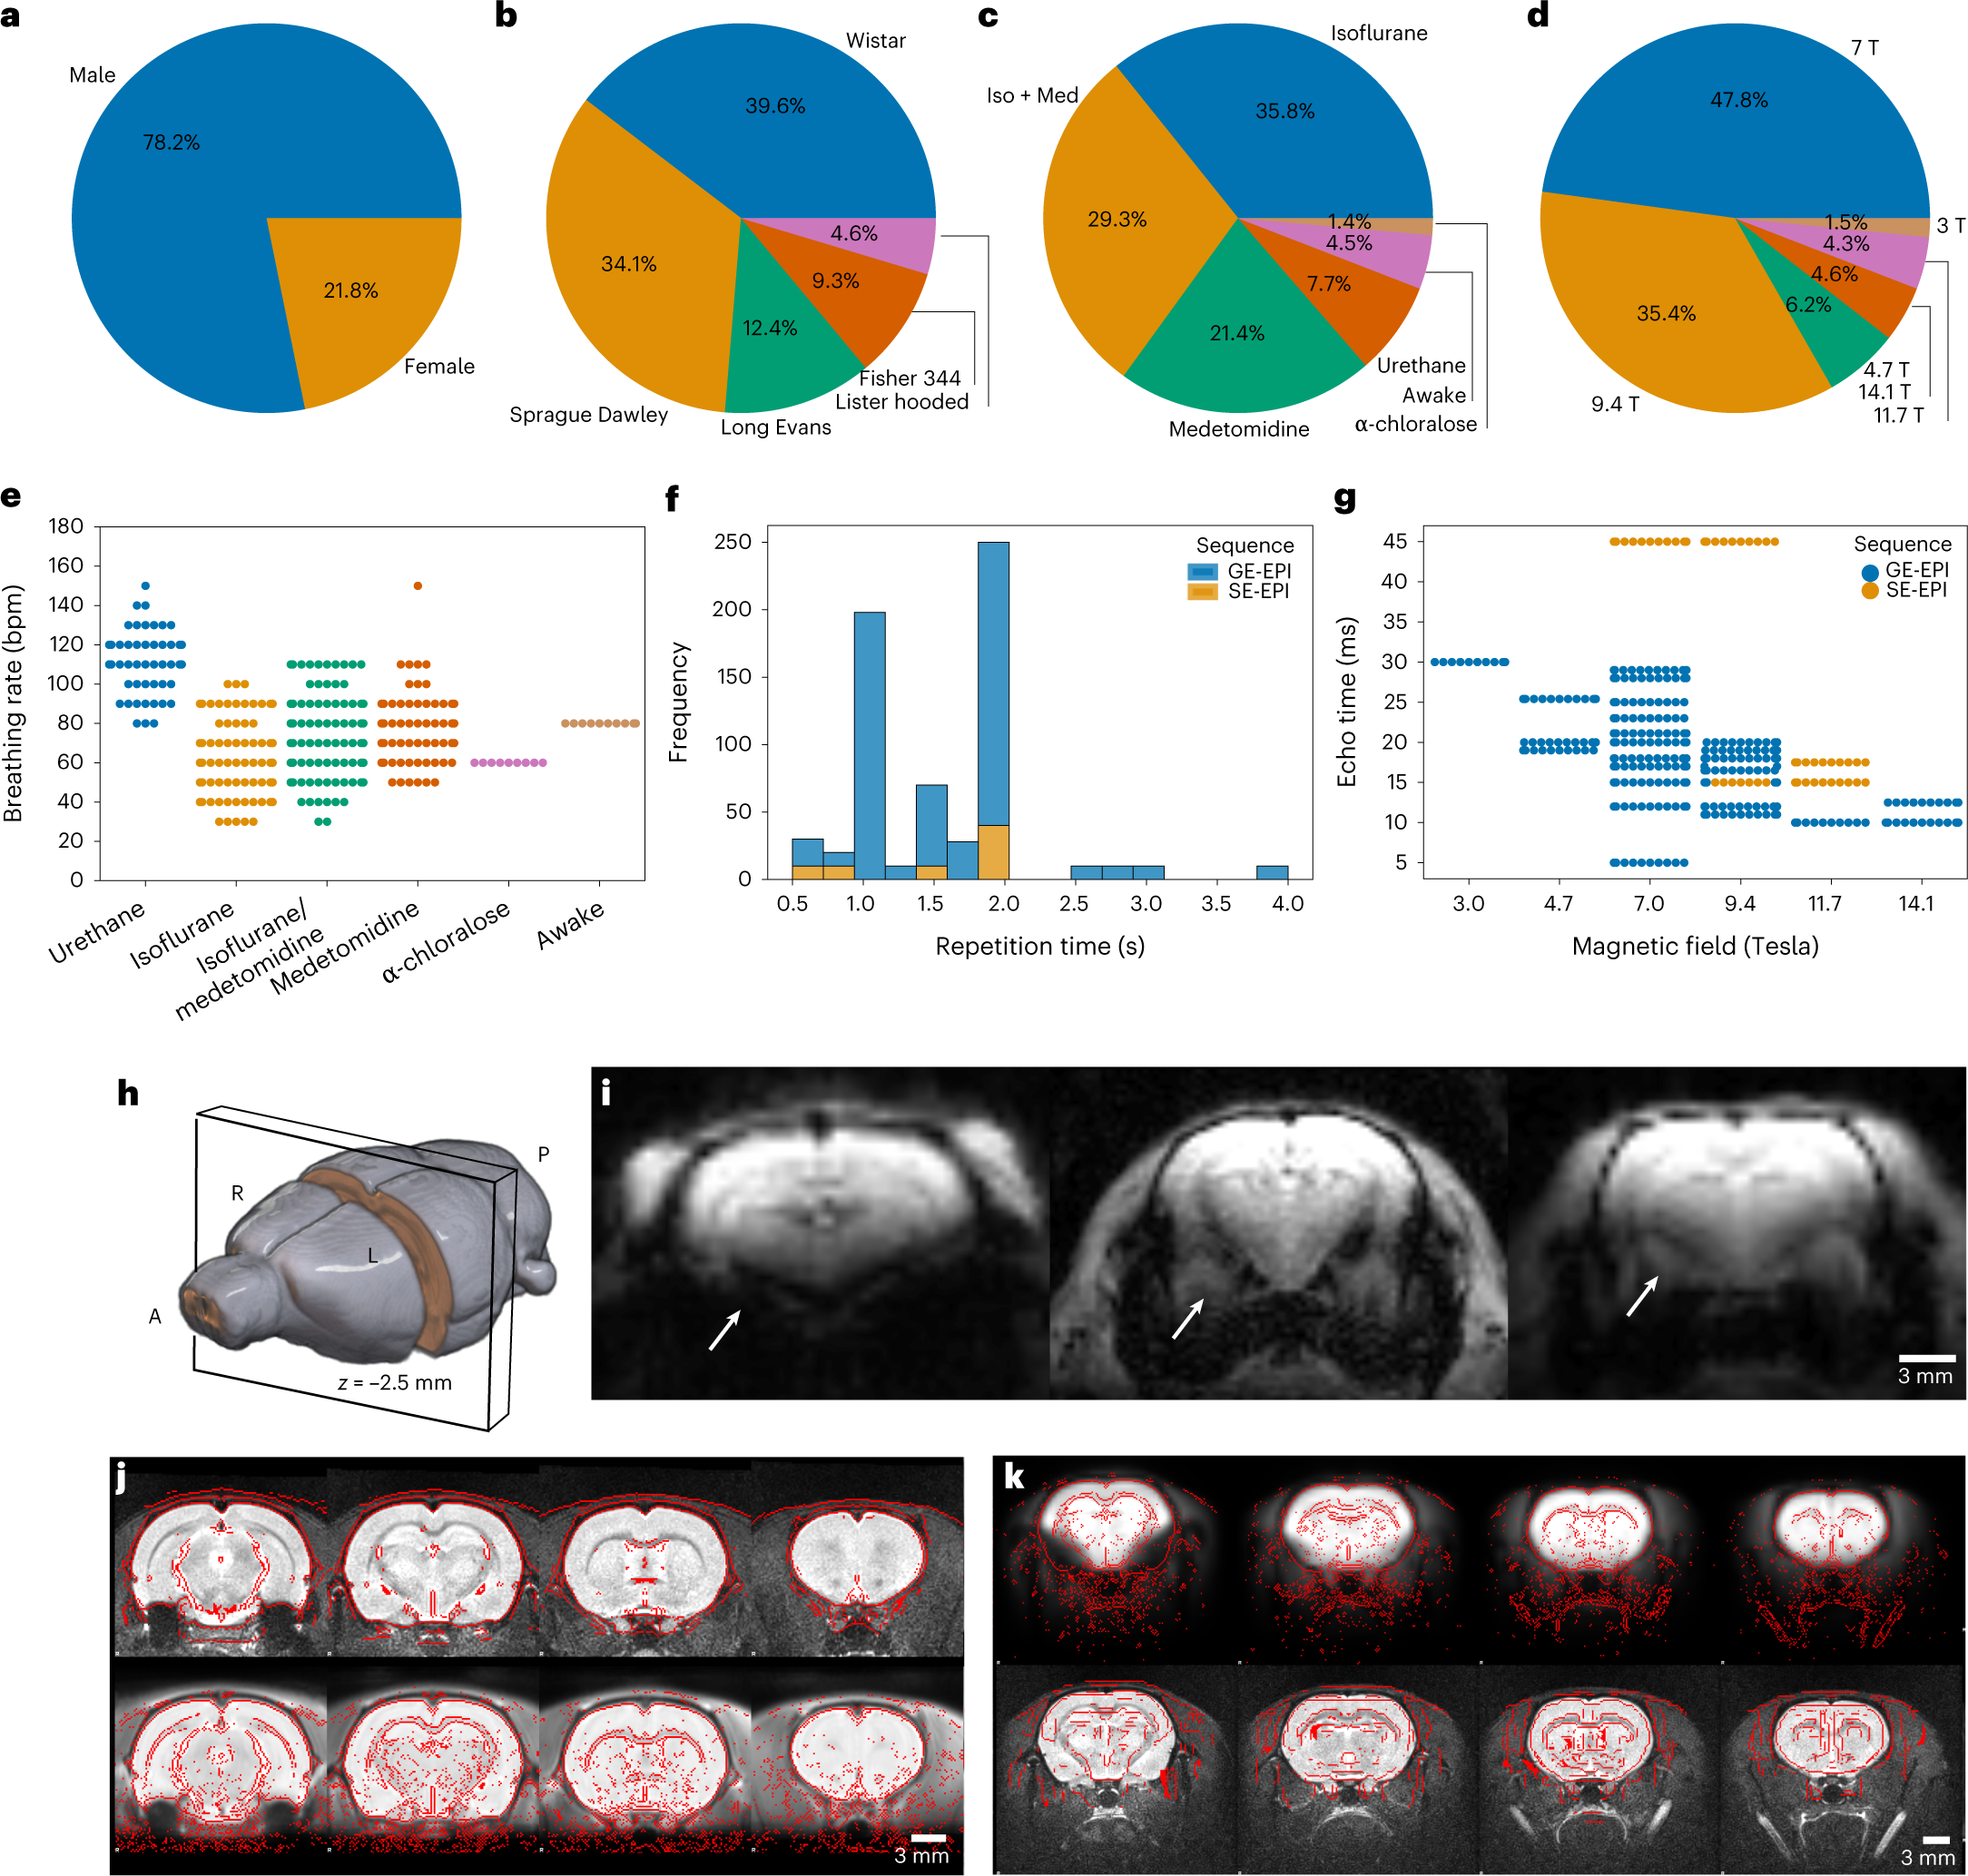 A consensus protocol for functional connectivity analysis in the rat brain  | Nature Neuroscience